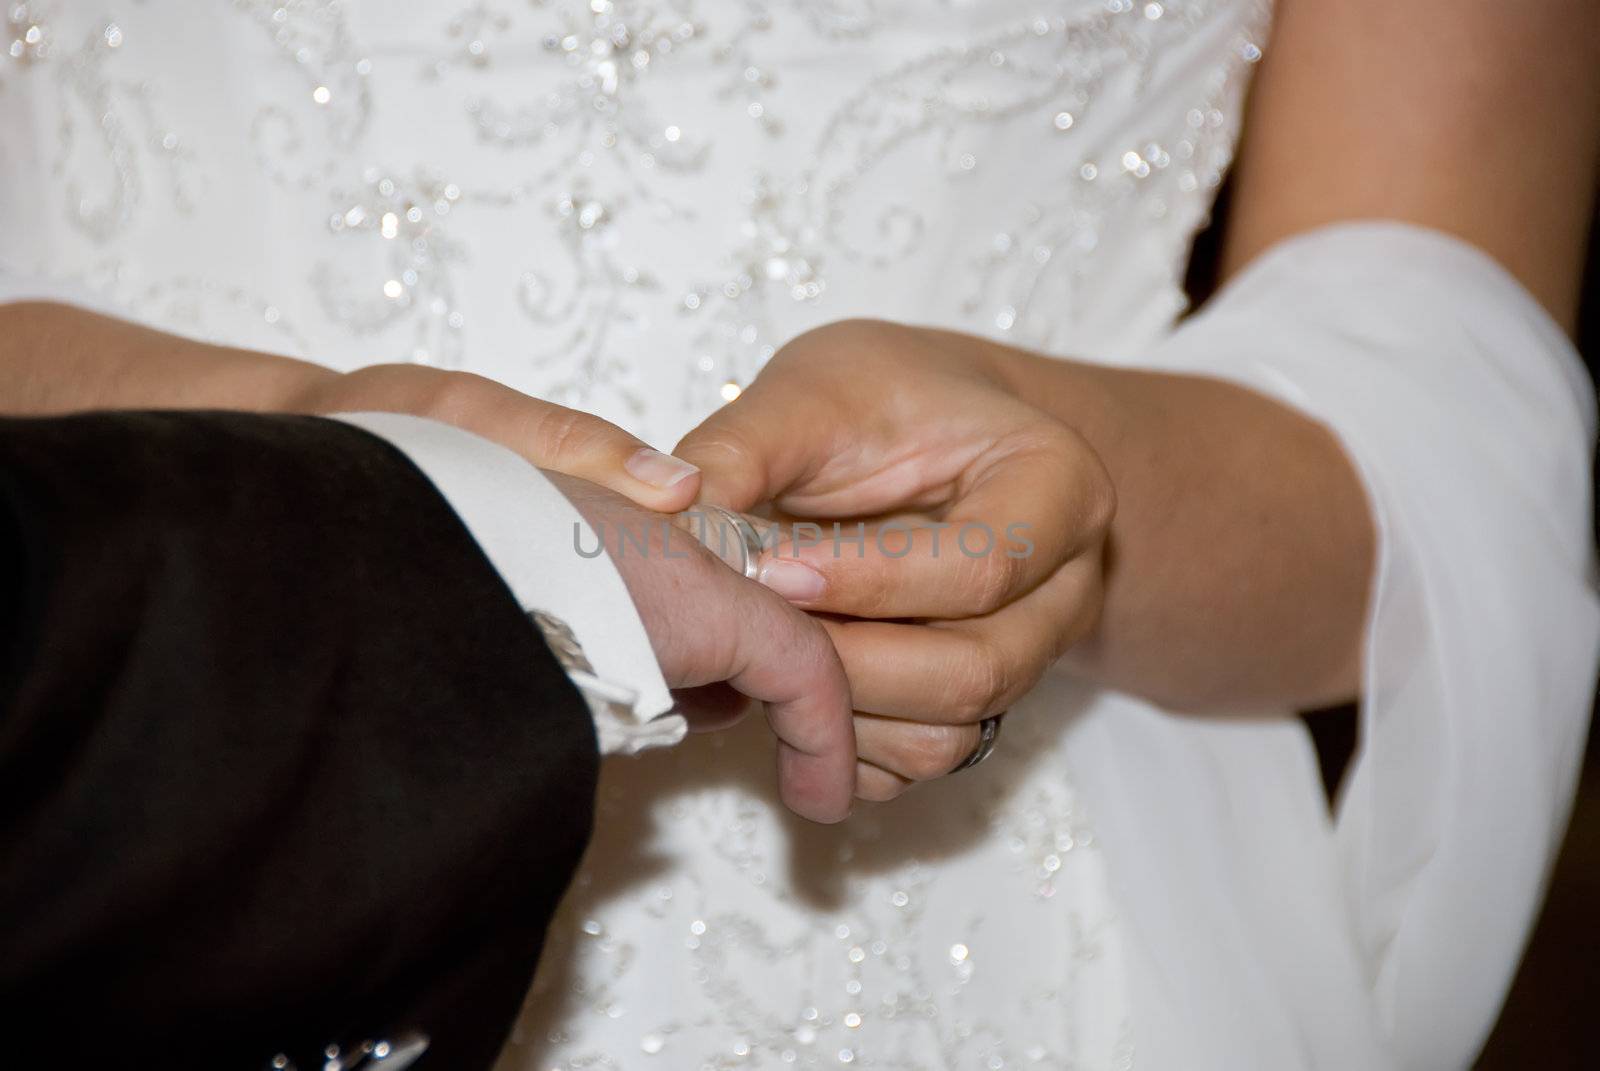 the bride attaching the ring to the grooms finger at a wedding ceremony